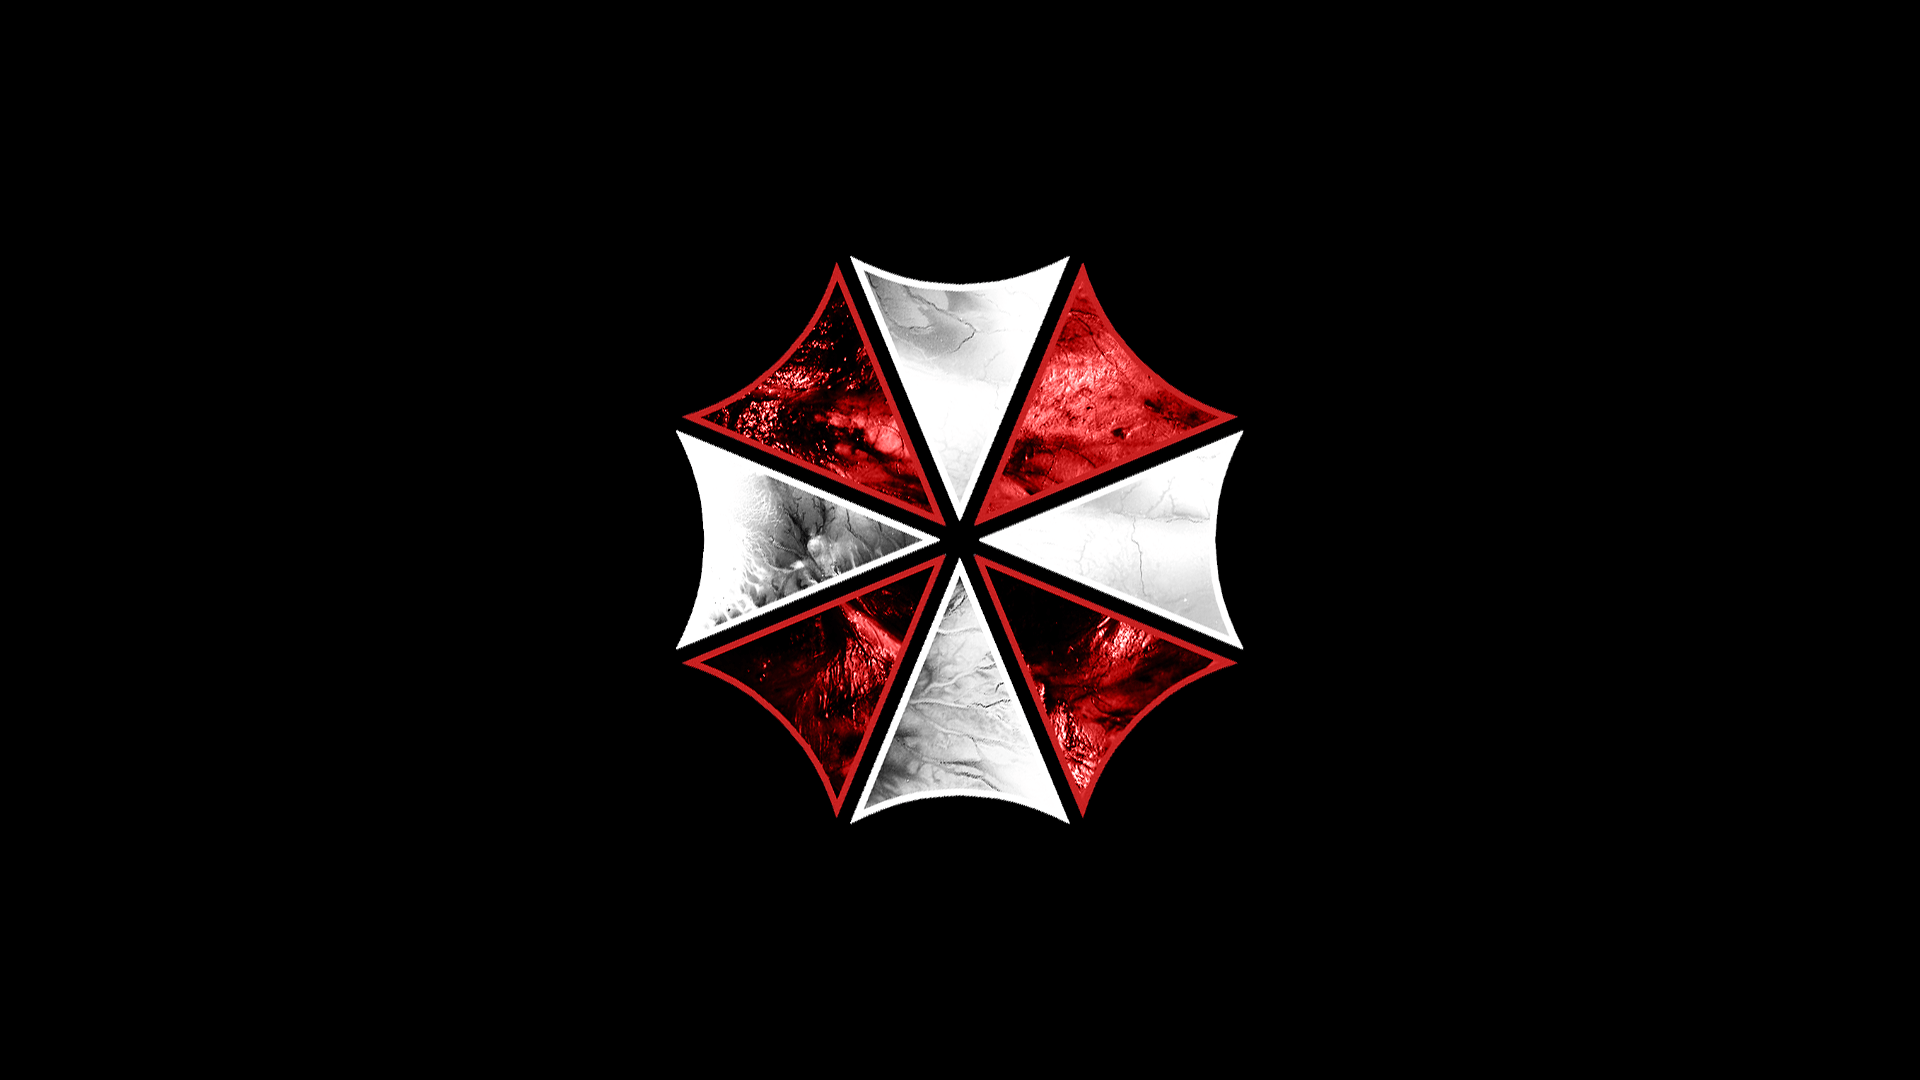 video games, movies, Resident Evil, Umbrella Corp., logos, simple. Resident evil movie, Umbrella corporation, Resident evil